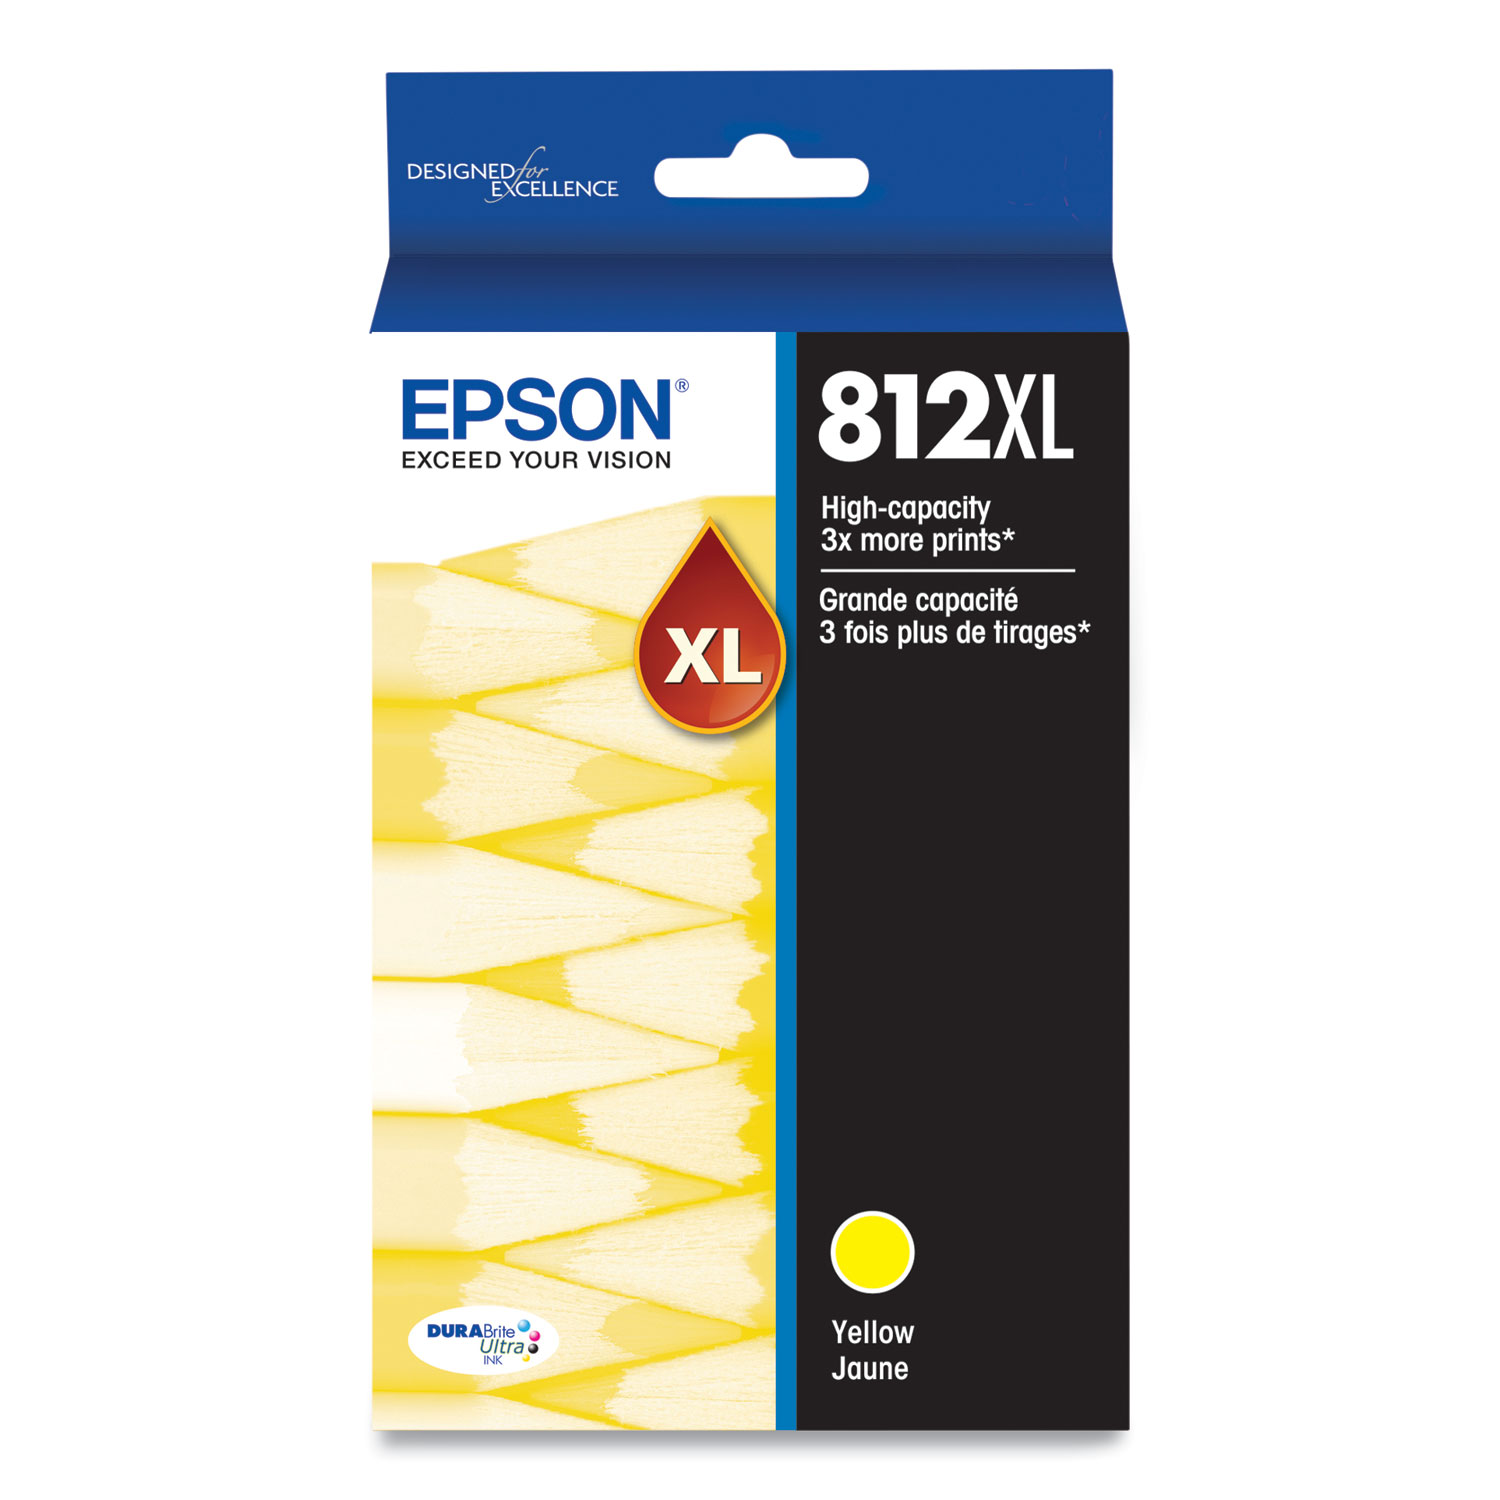  Epson T812XL420S T812XL420S (T812XL) DURABrite Ultra High-Yield Ink, 1,100 Page-Yield, Yellow (EPST812XL420S) 